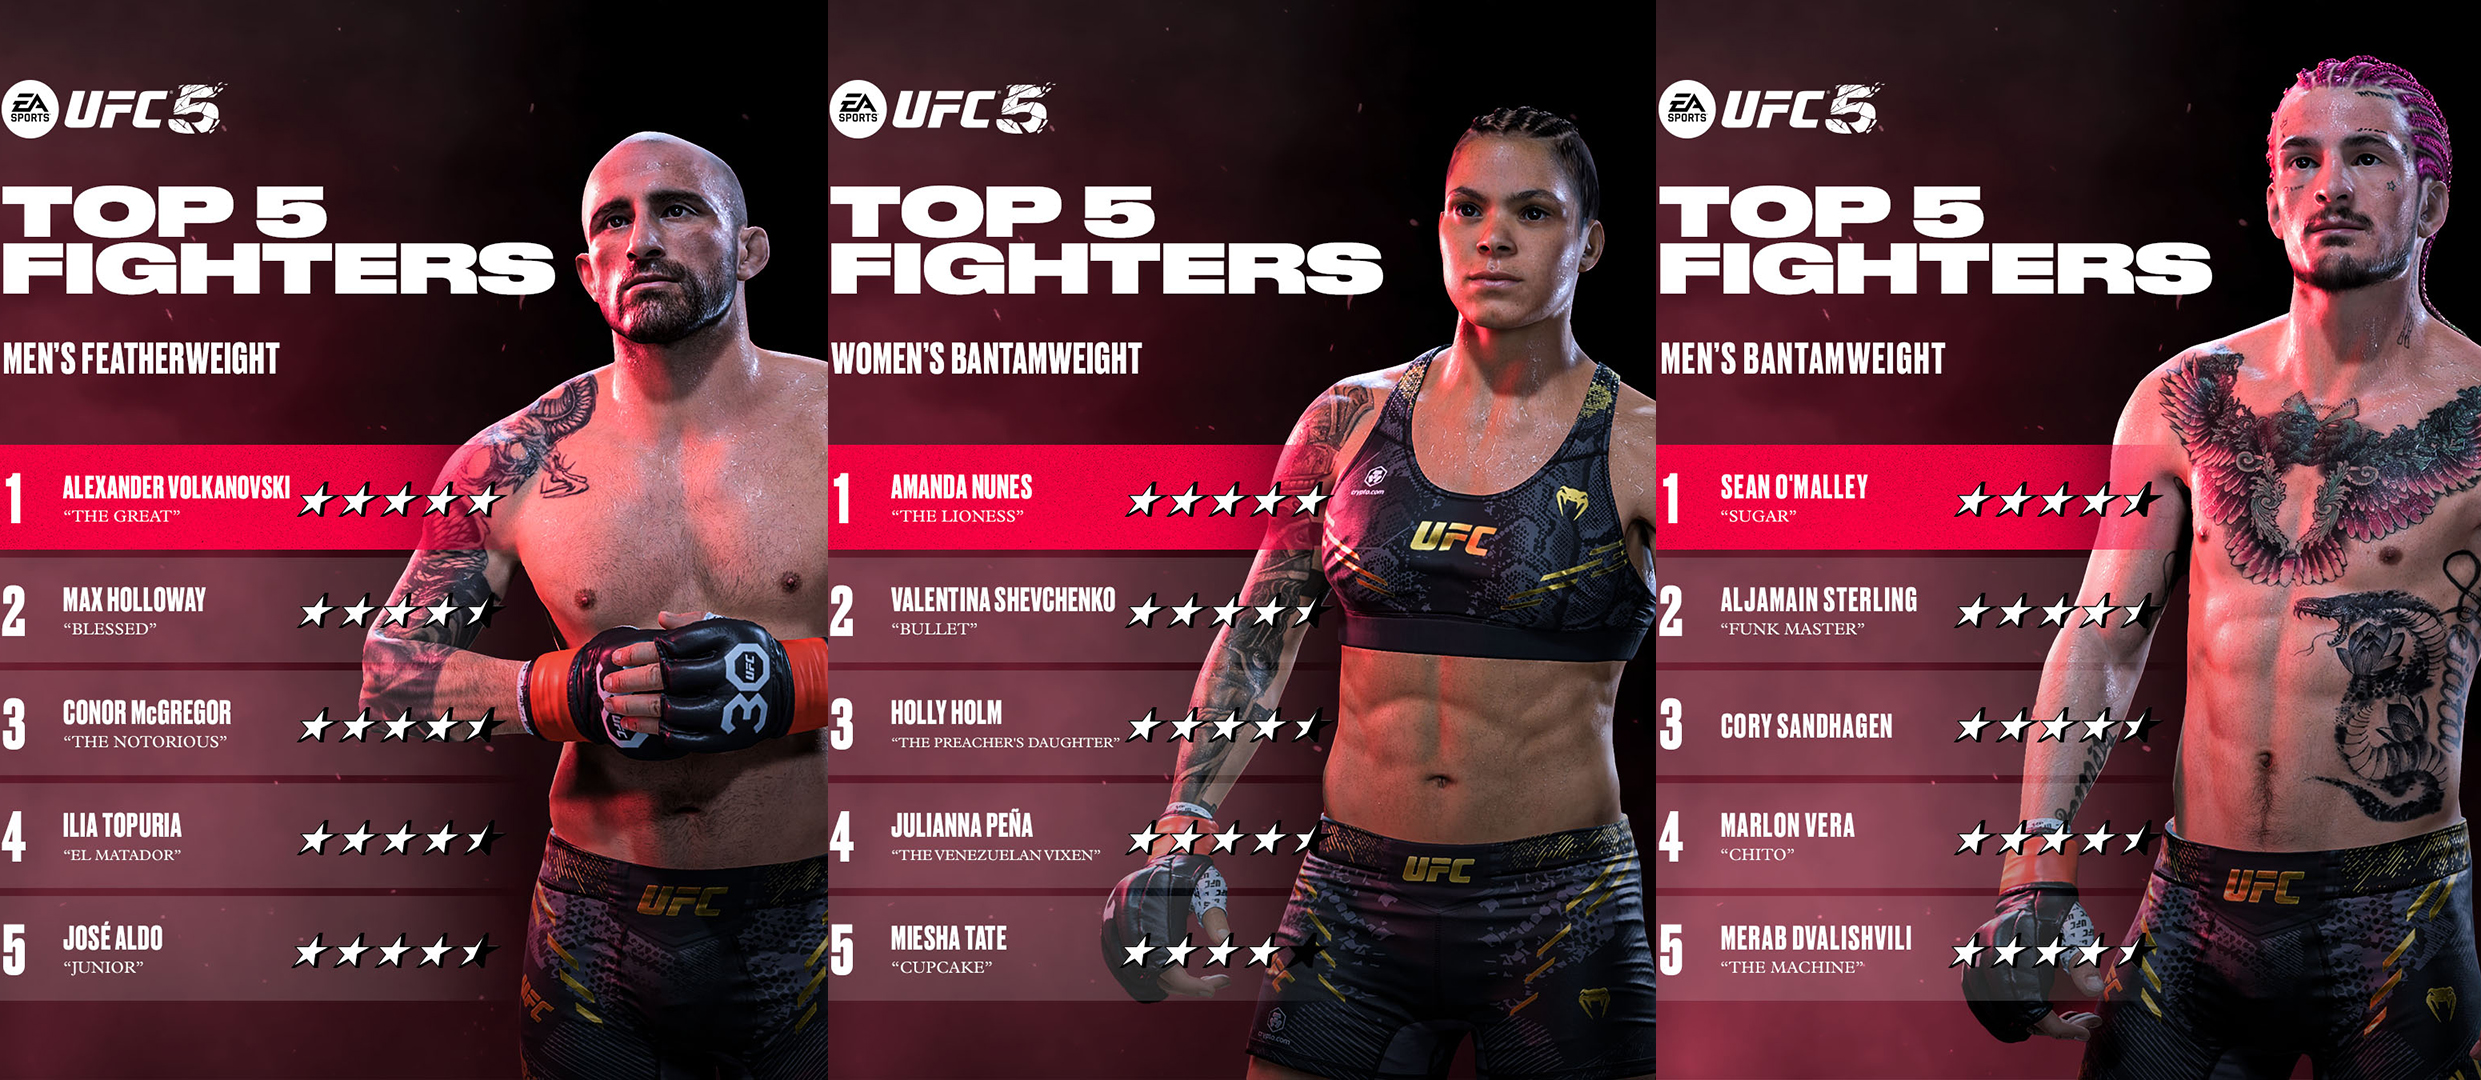 UFC 4: Best Fighters For Beginners, Ranked